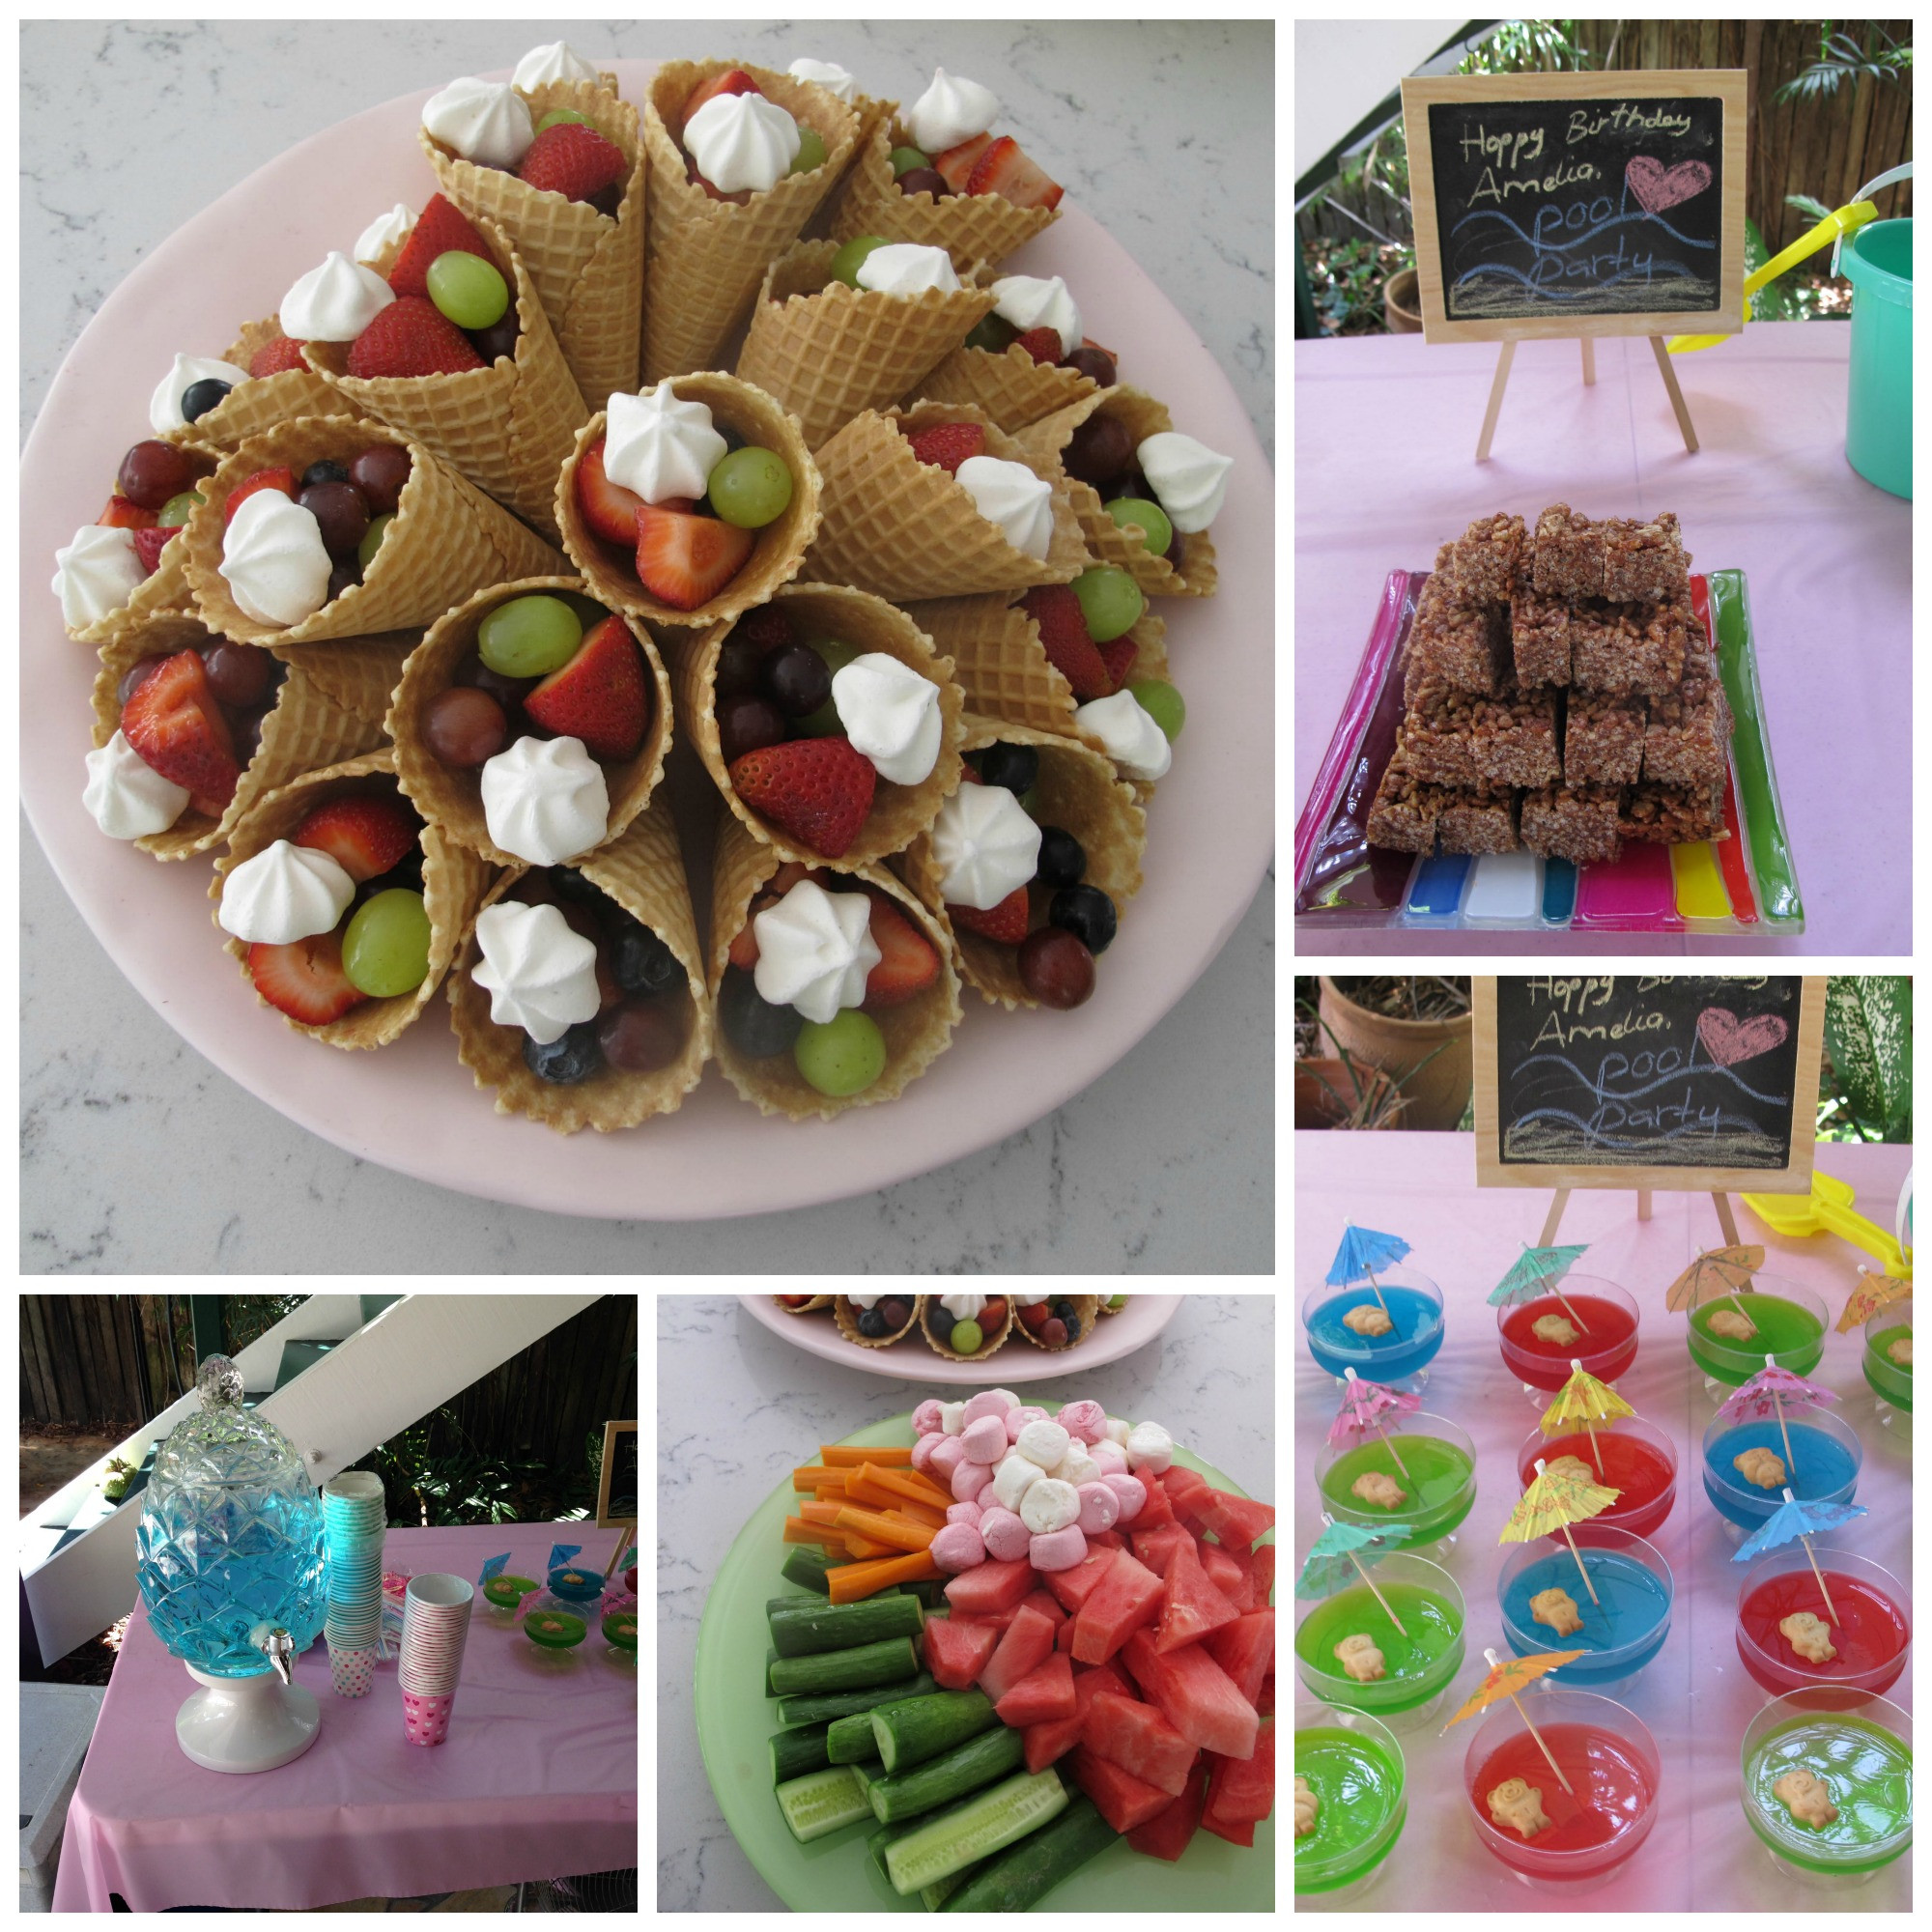 Pool Party Food Ideas For Tweens
 Birthday Pool Party Tips Tricks and Cake hint have